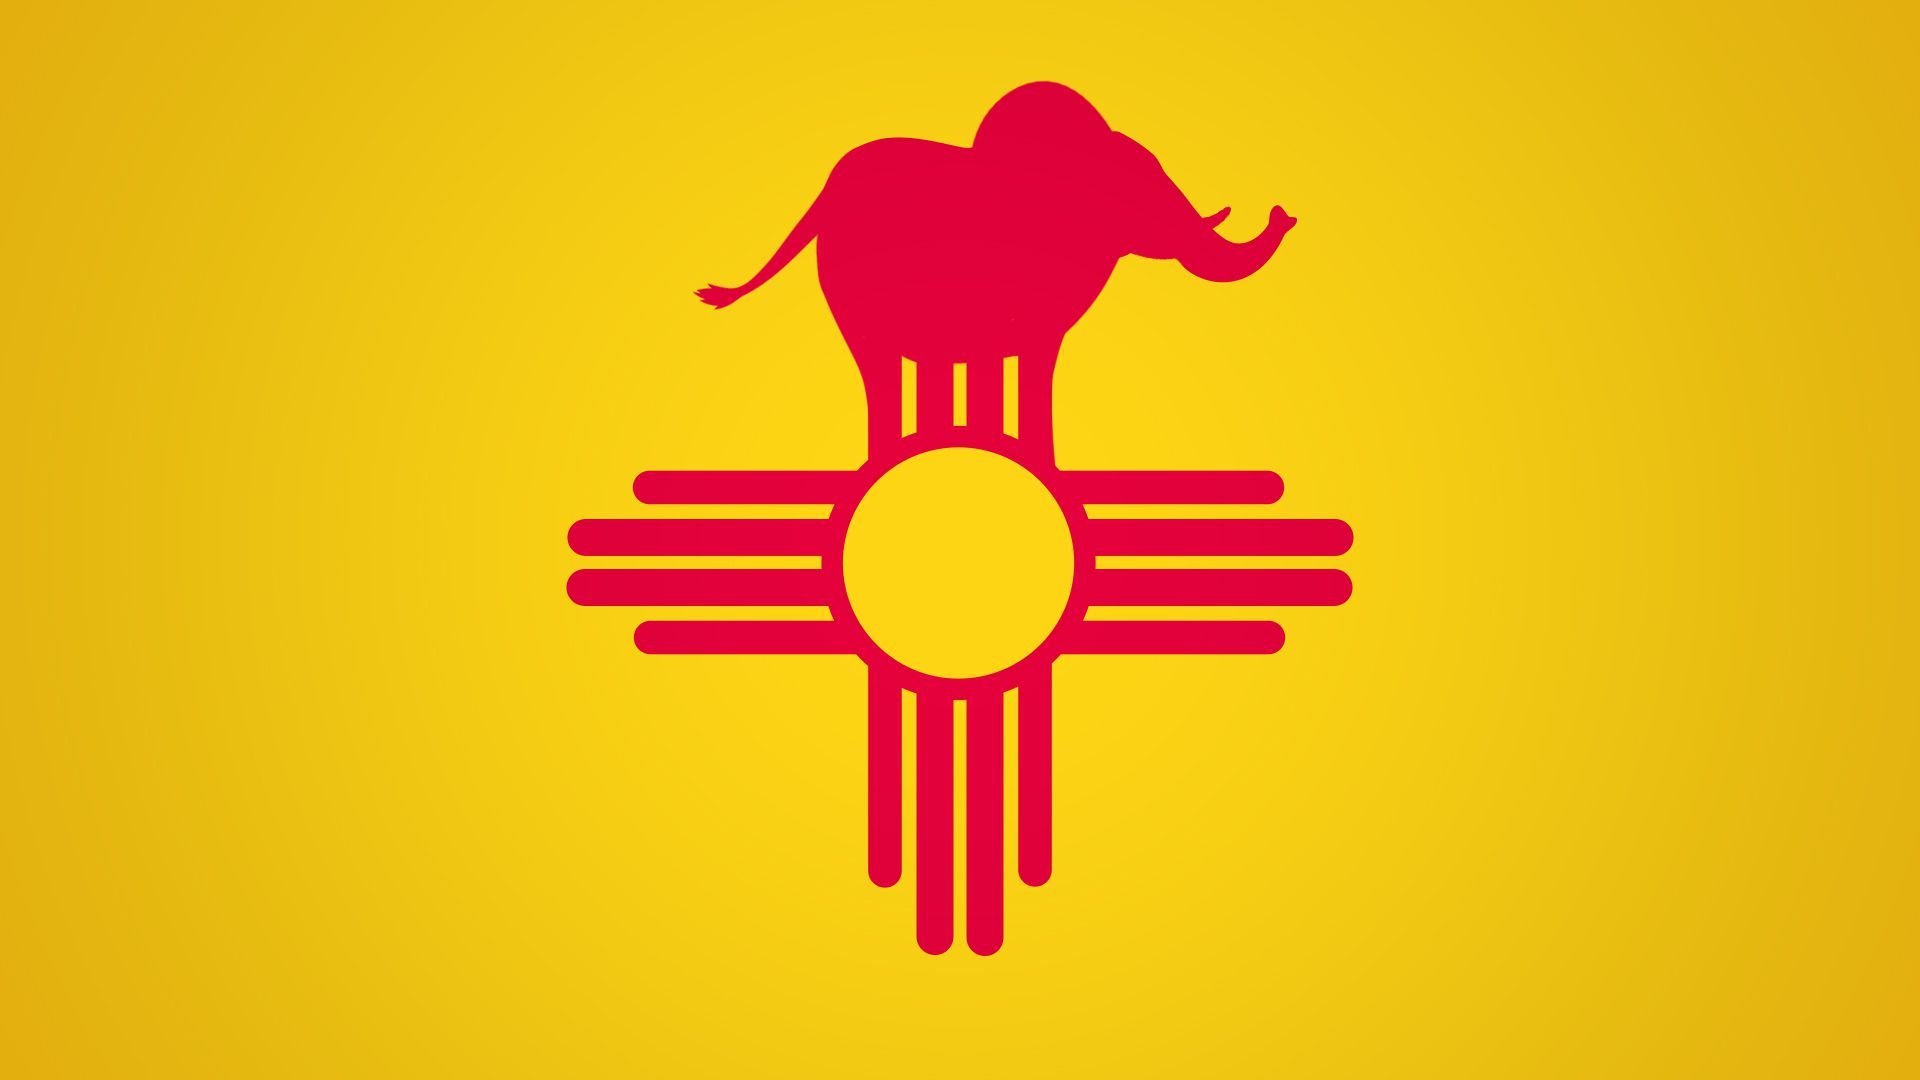 Illustration of an elephant at the top of the New Mexico flag.